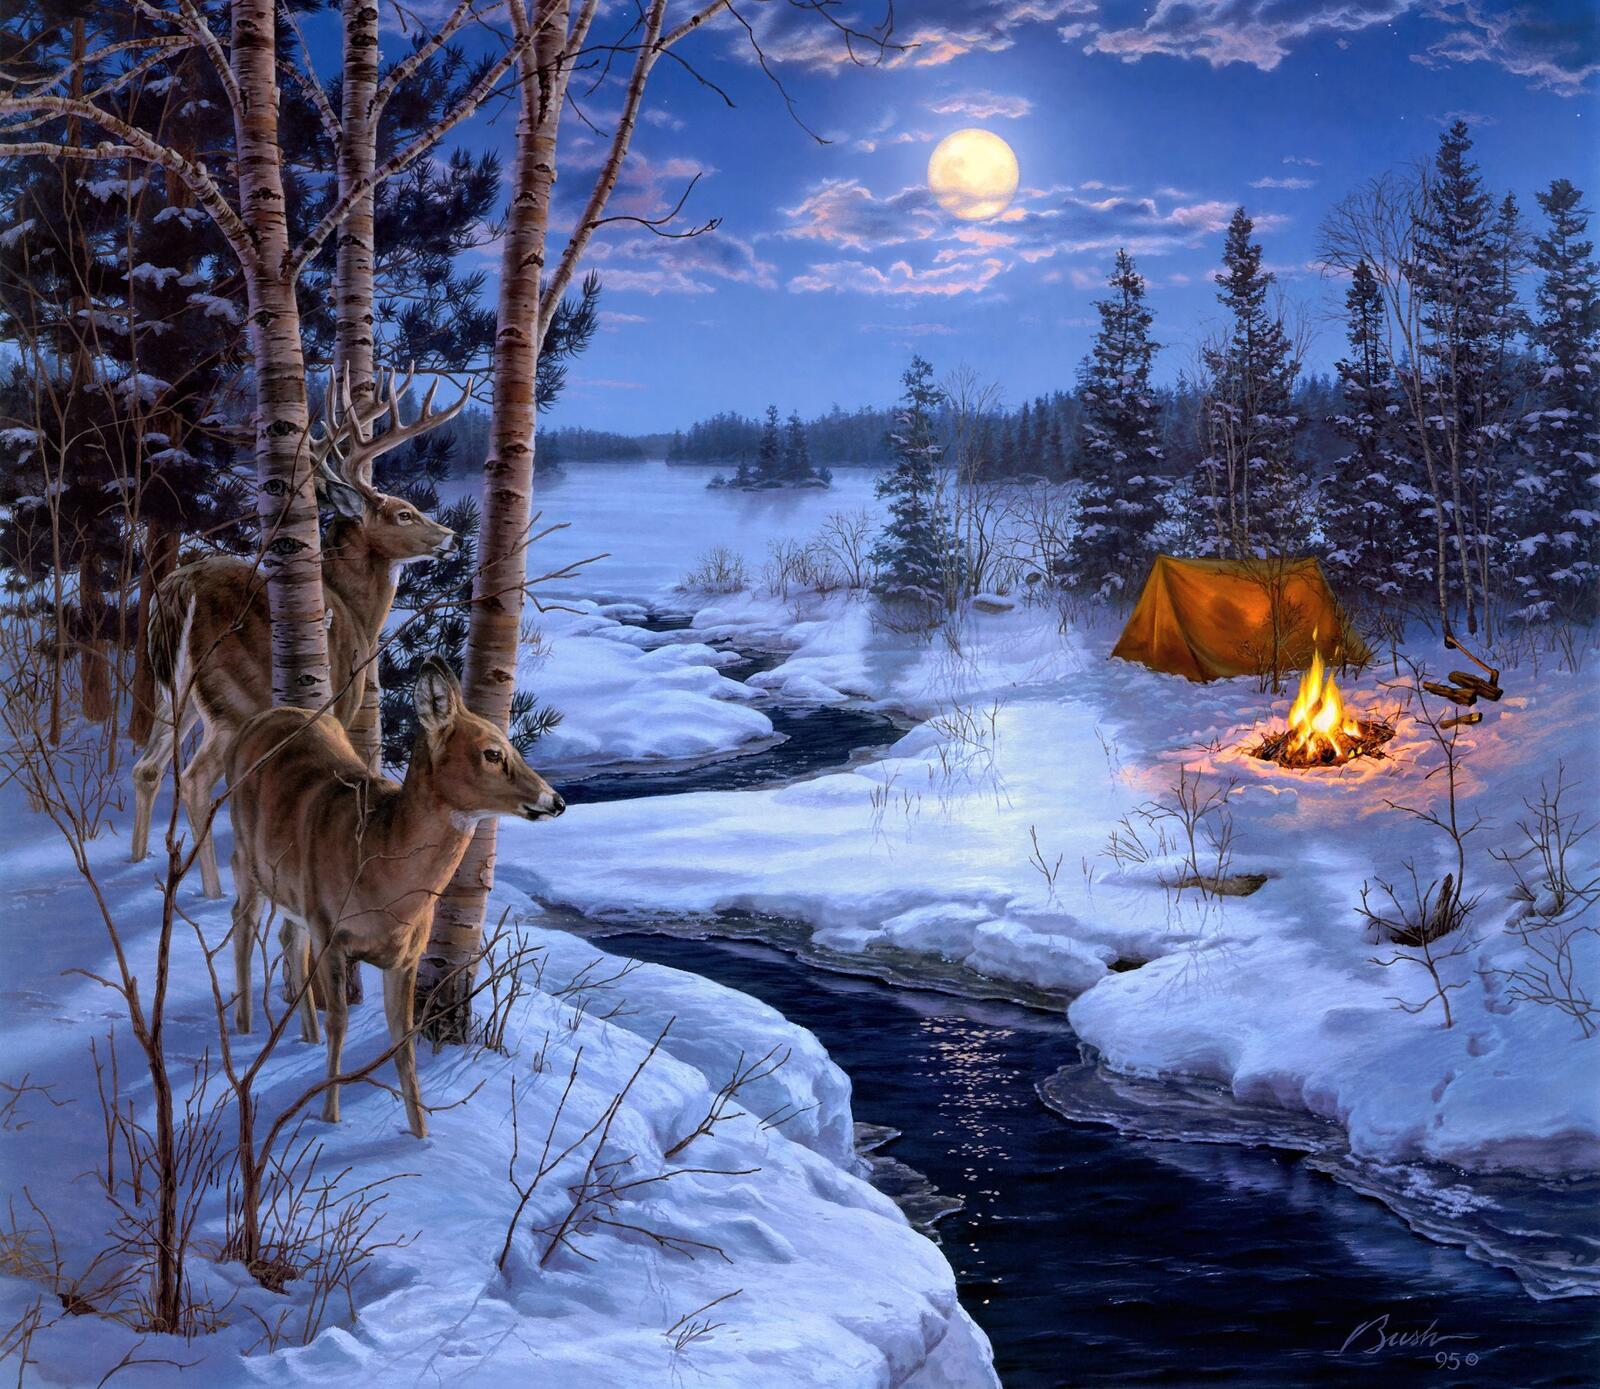 Wallpapers night in the forest winter river on the desktop